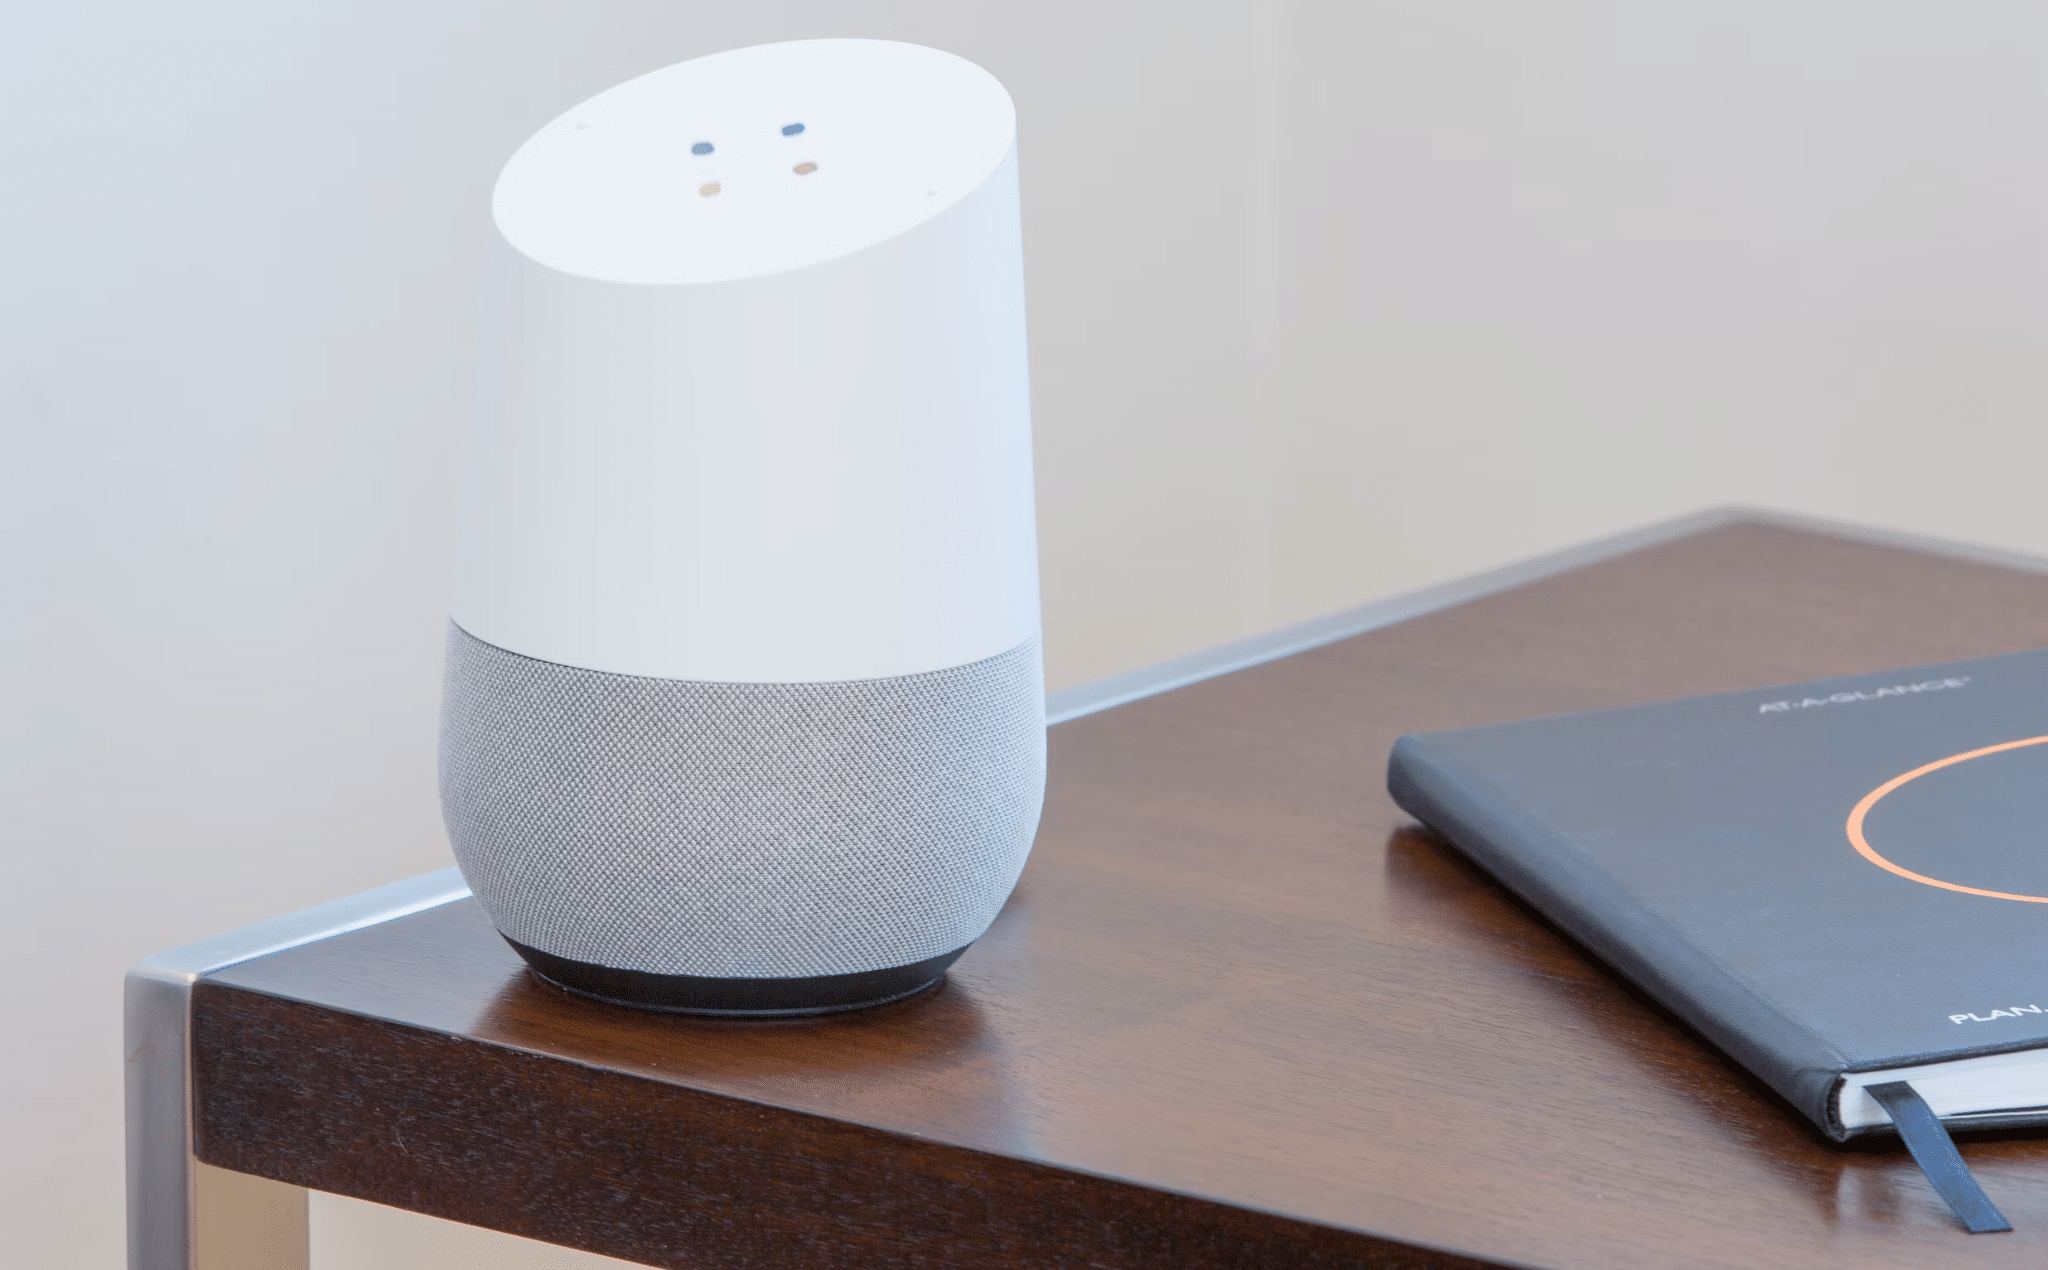 The effect of AI in smart home systems